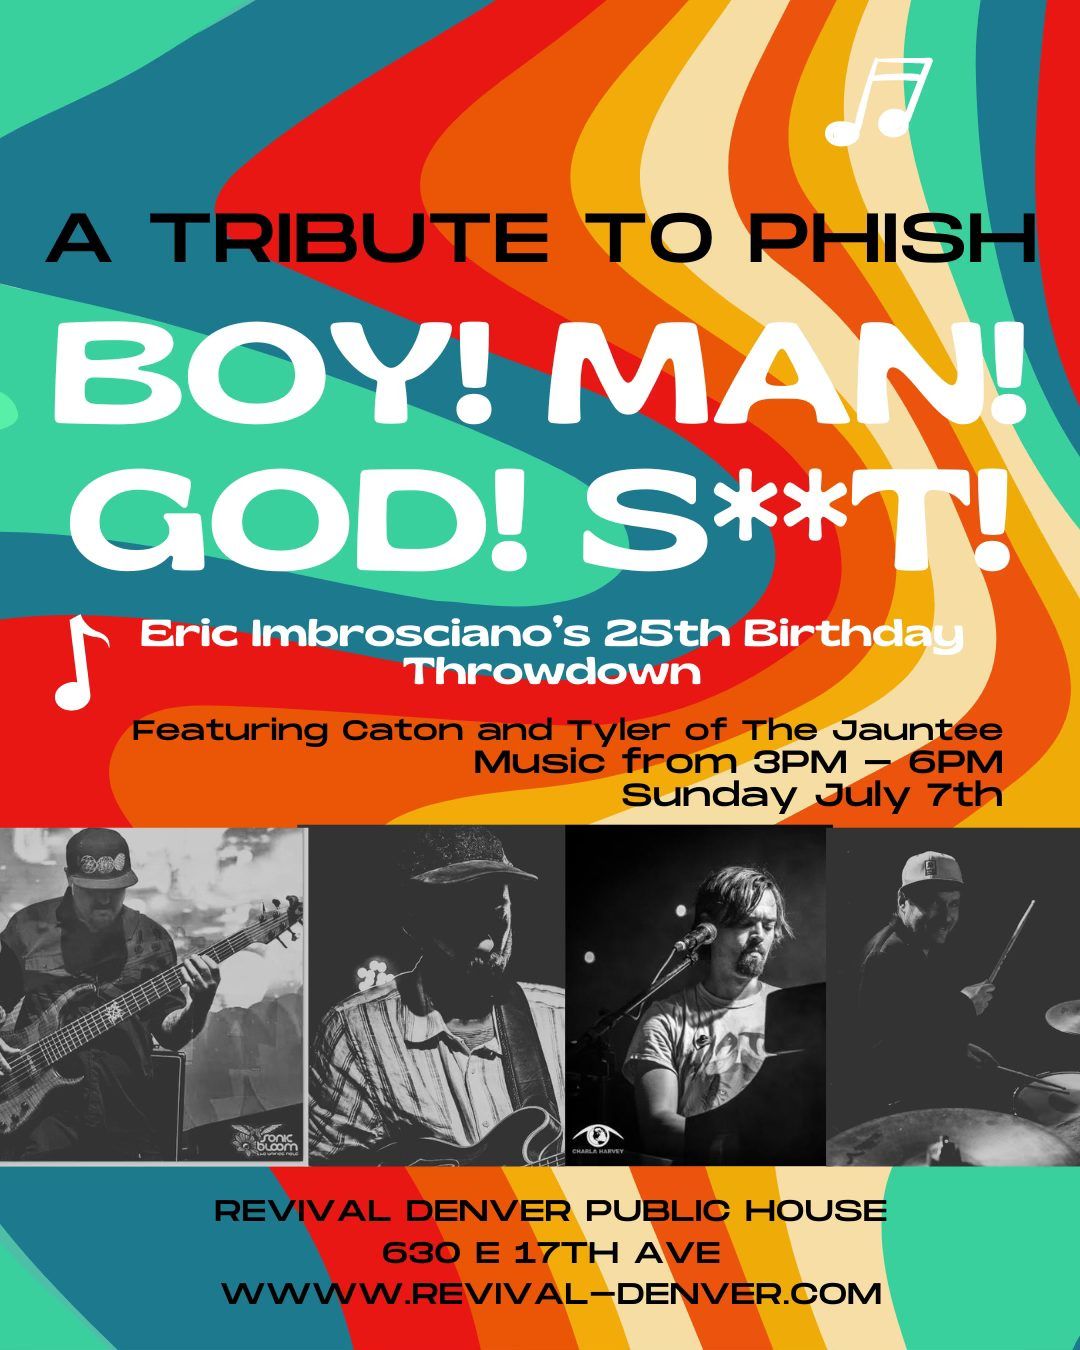 Boy Man God Sh*t-A Tribute To PHISH ft members of The Jauntee and Lit Society